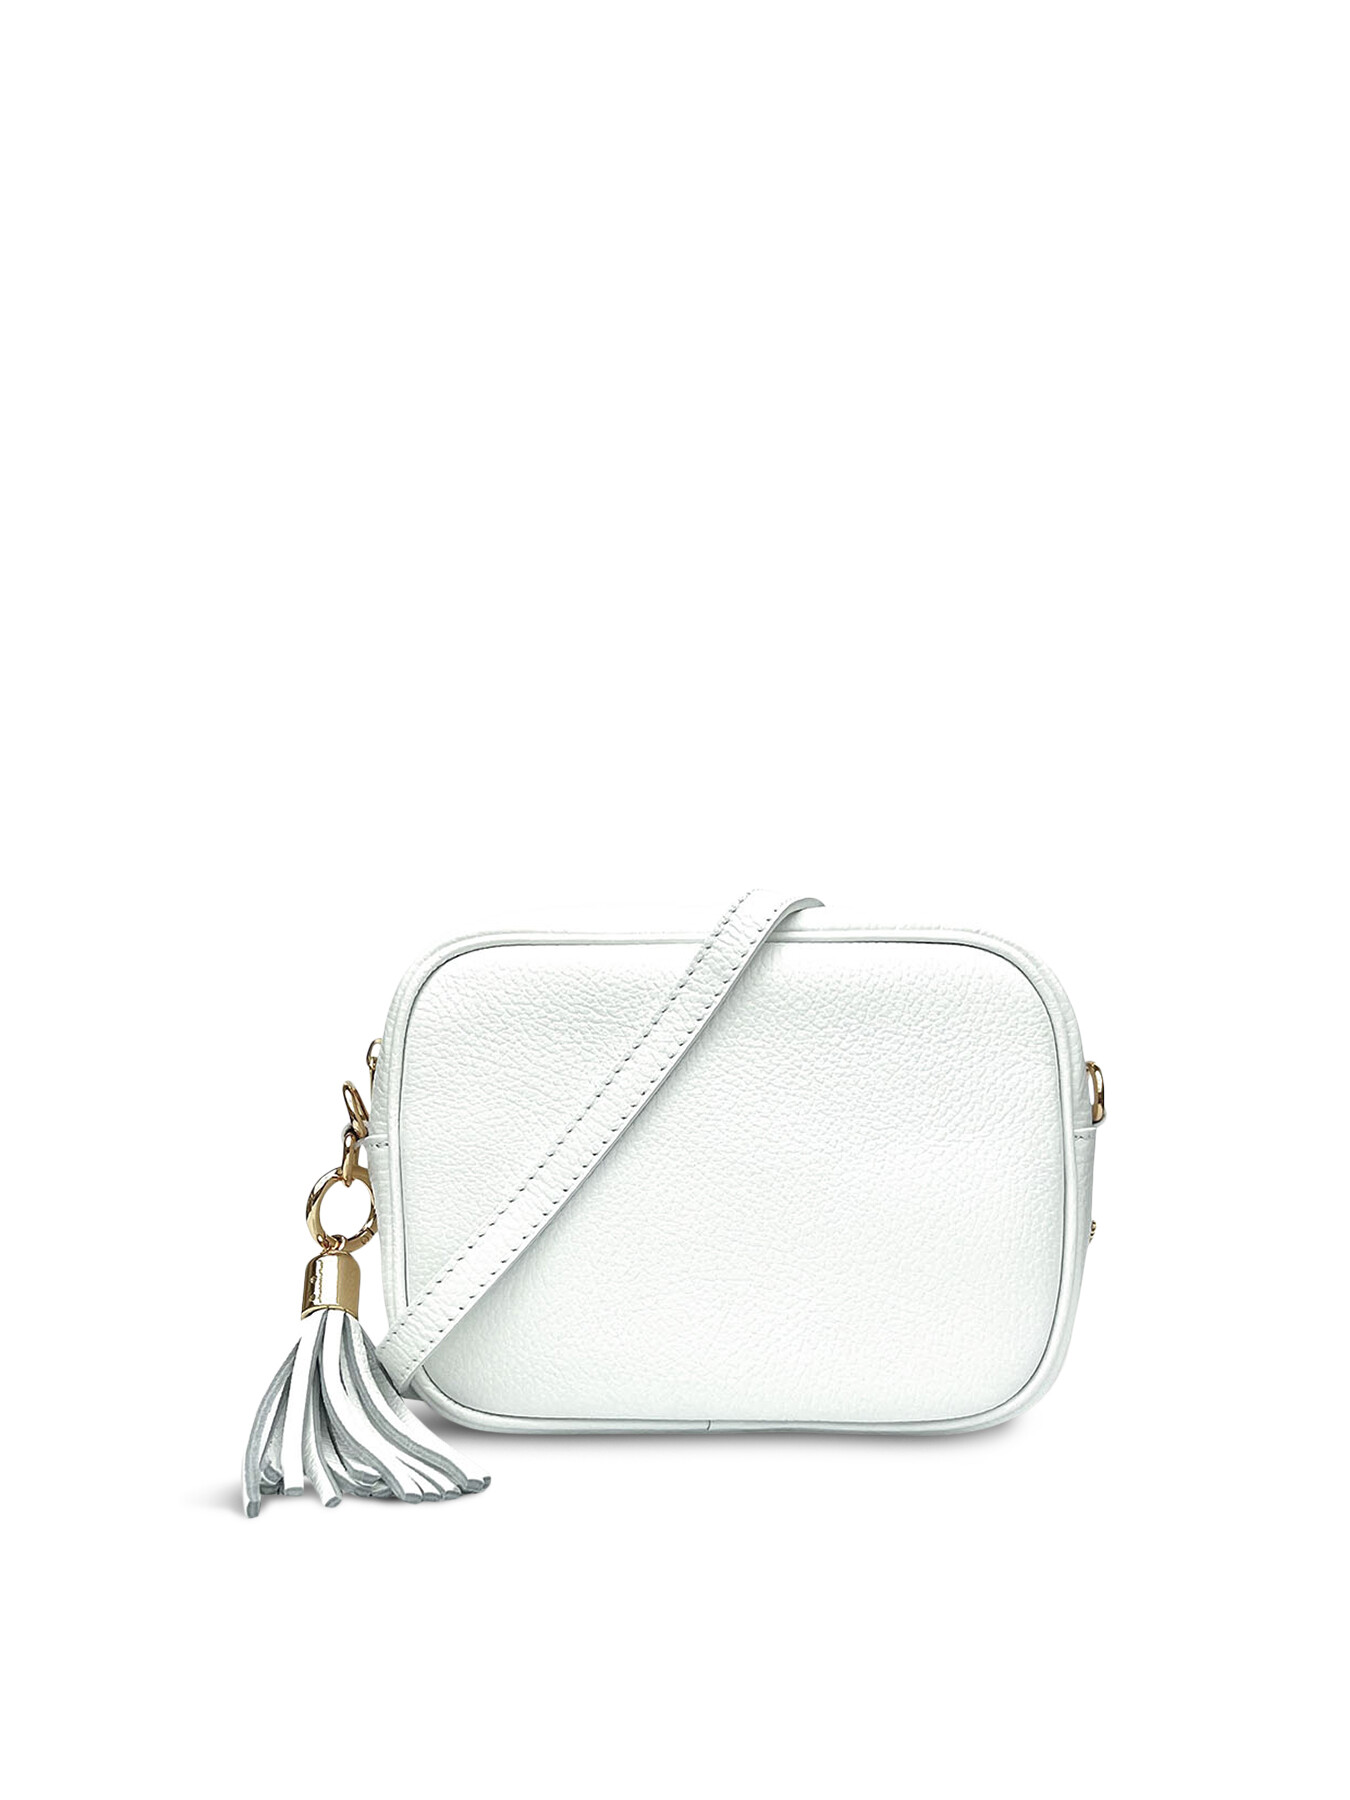 Tan Leather Crossbody Bag - Apatchy London